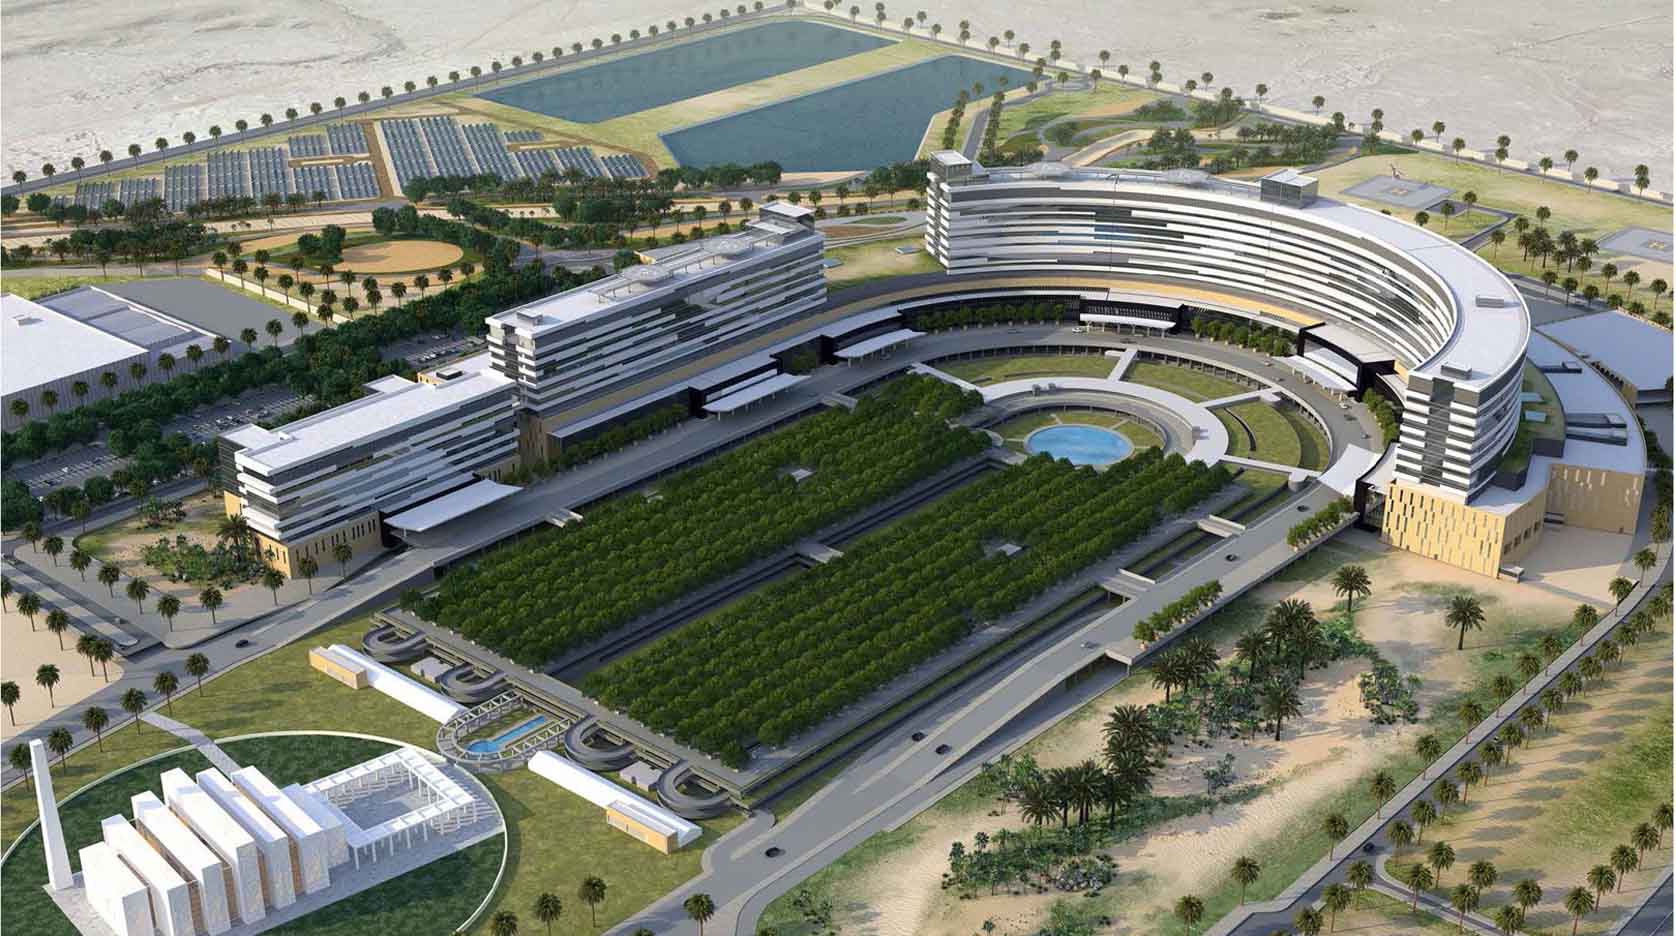 SECURITY FORCES MEDICAL CENTER PROJECT AT RIYADH AND JEDDAH